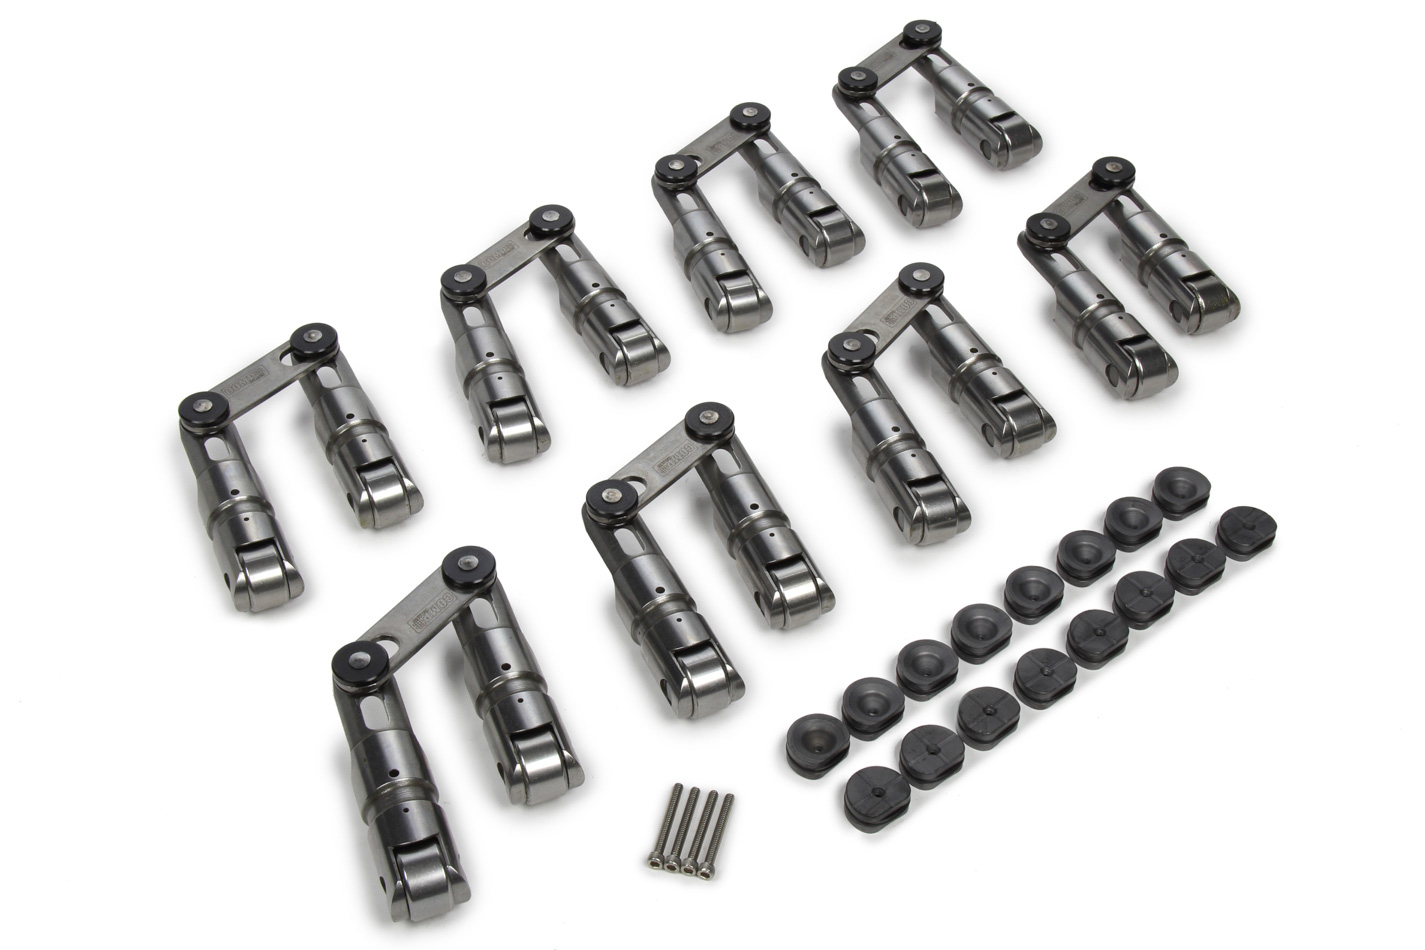 COMP CAMS Lifter, Race XD, Mechanical Roller, 0.904" OD, Link Bar, Small Block Chevy, Set of 16